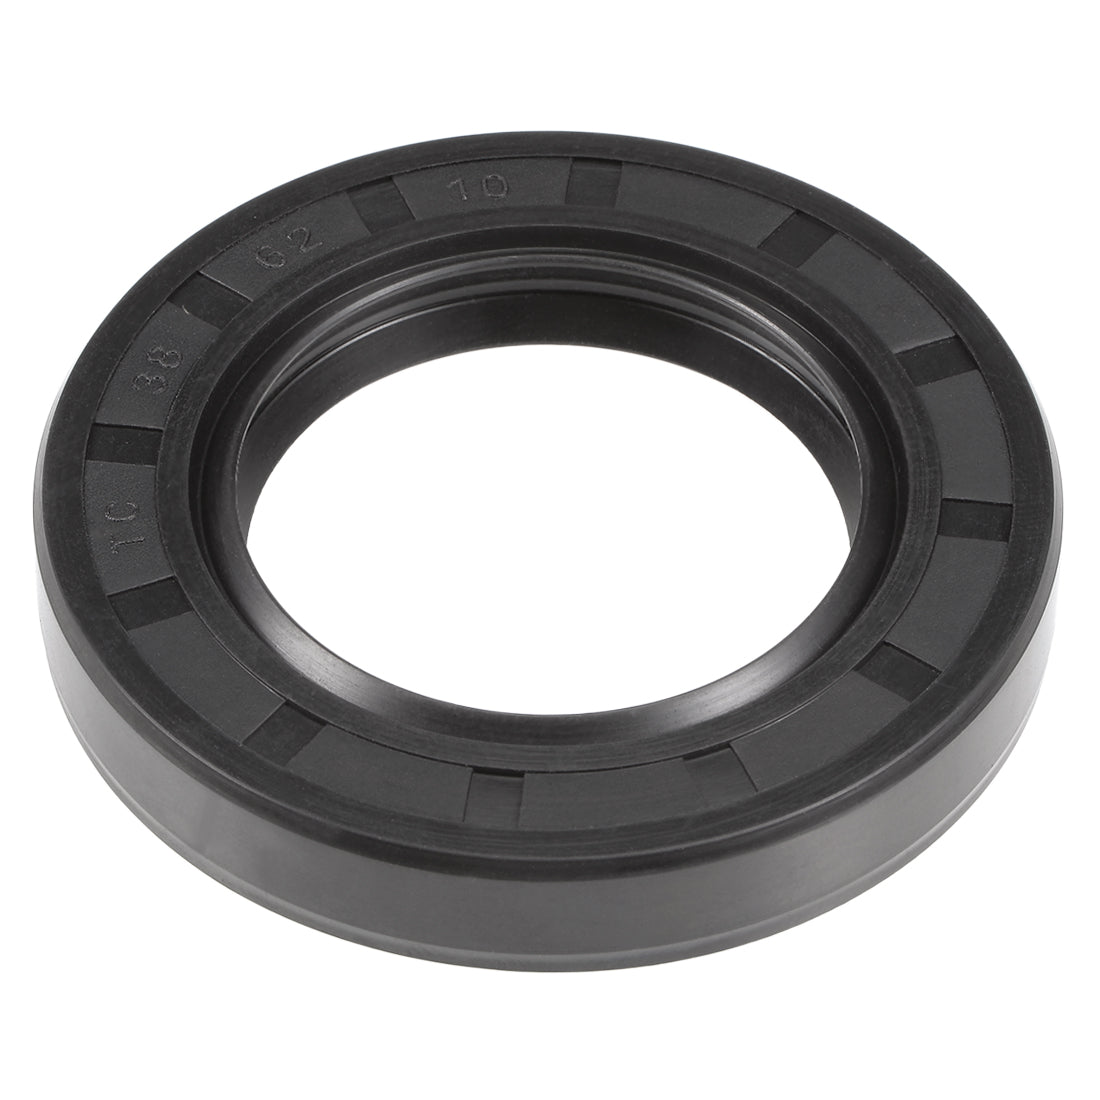 uxcell Uxcell Oil Seal, TC 38mm x 62mm x 10mm, Nitrile Rubber Cover Double Lip